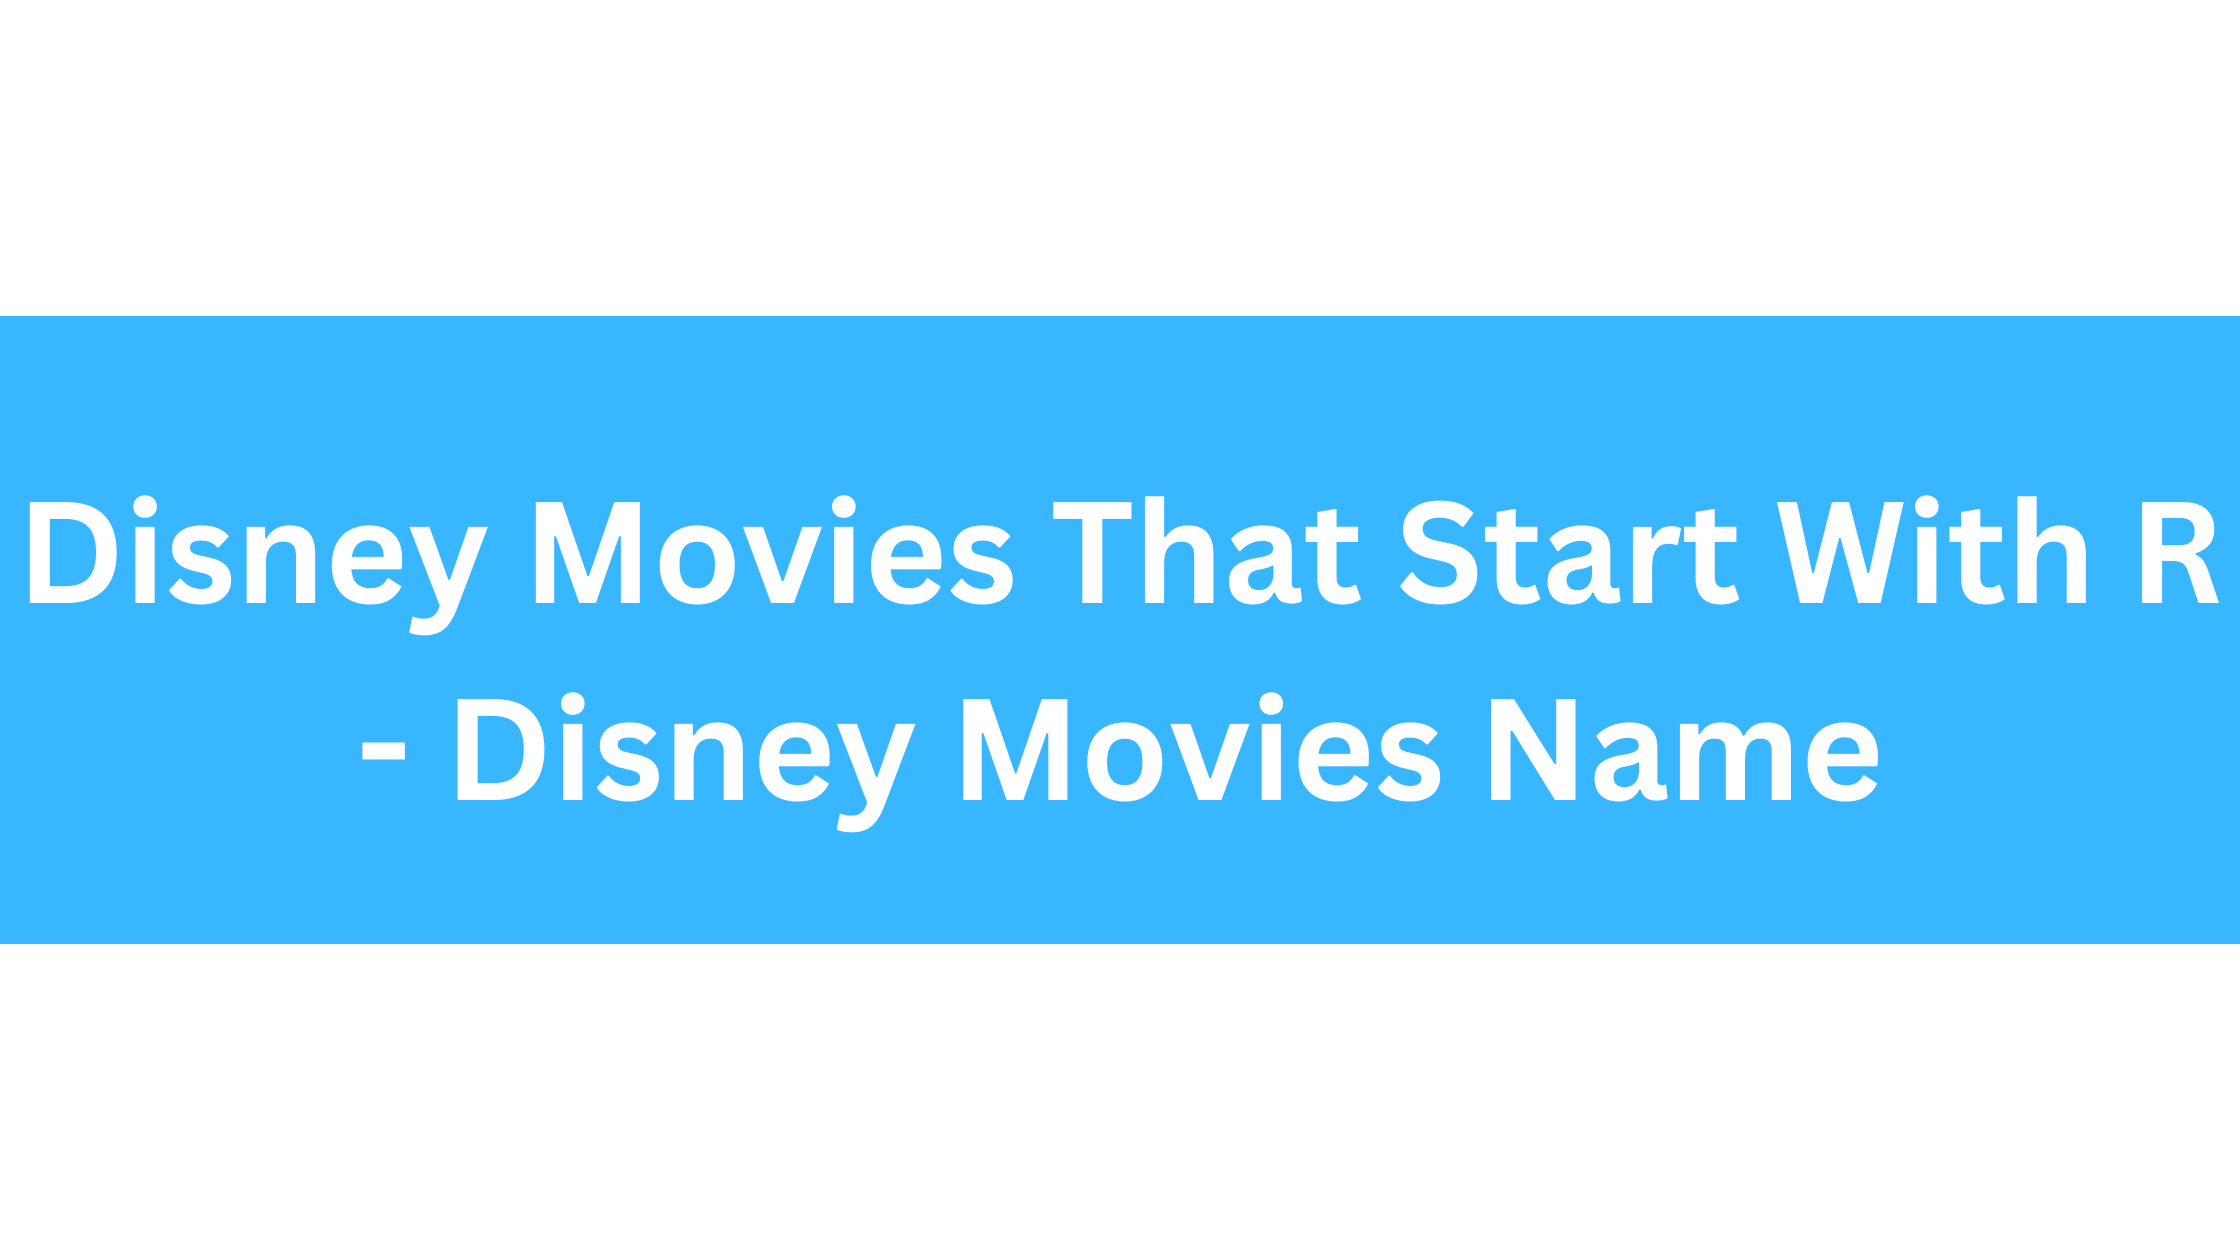 Disney Movies That Start With R